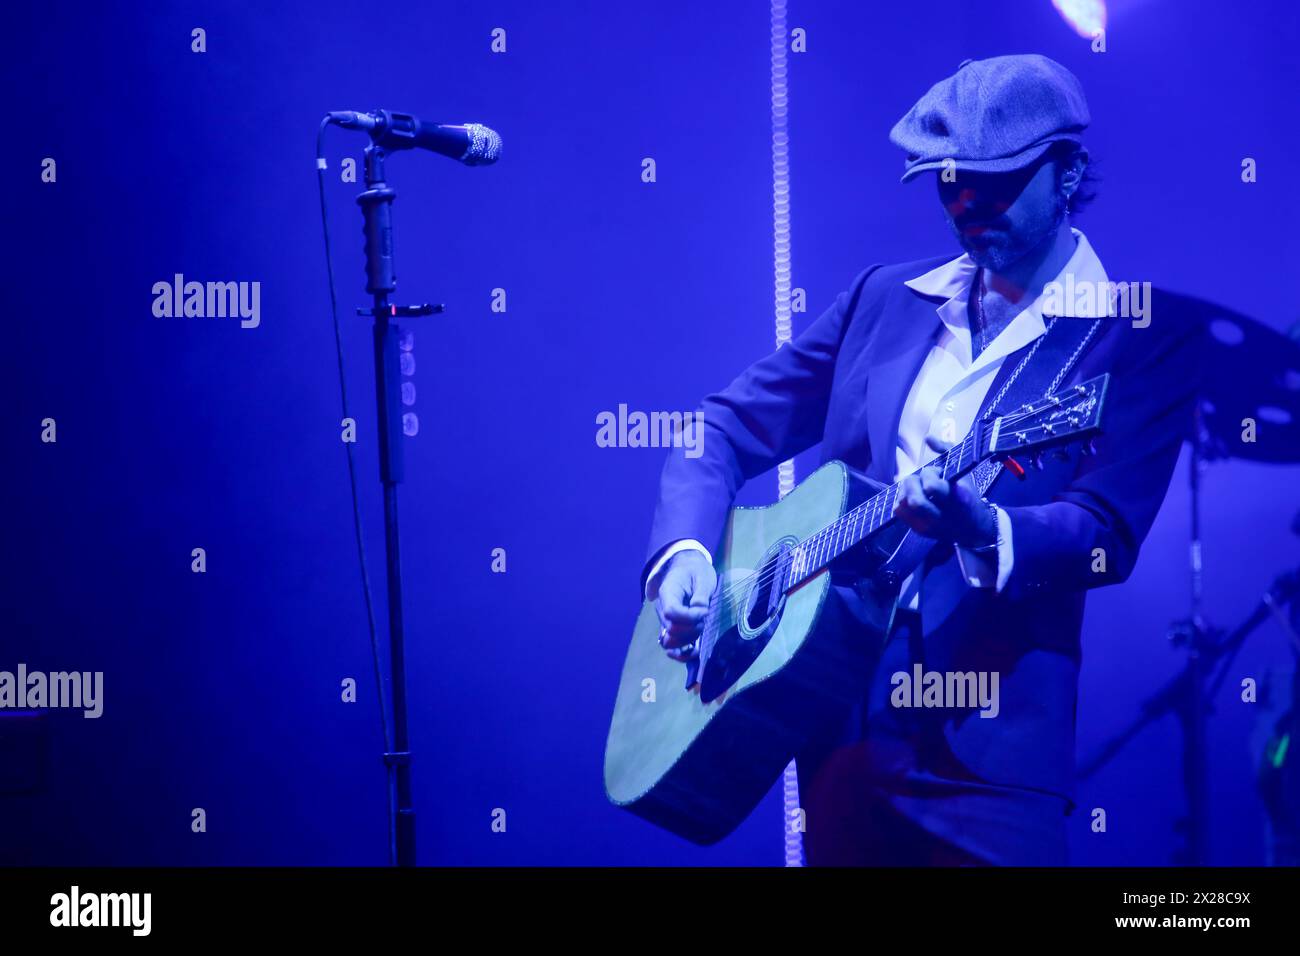 Gijón, Spain, April 20th, 2024: Singer and guitarist, Juancho Conejo singing during the Sidecars Concert at the Airplane Mode Theater Tour, on April 20, 2024, at the Teatro de La Laboral, in Gijón, Spain. Credit: Alberto Brevers / Alamy Live News. Stock Photo